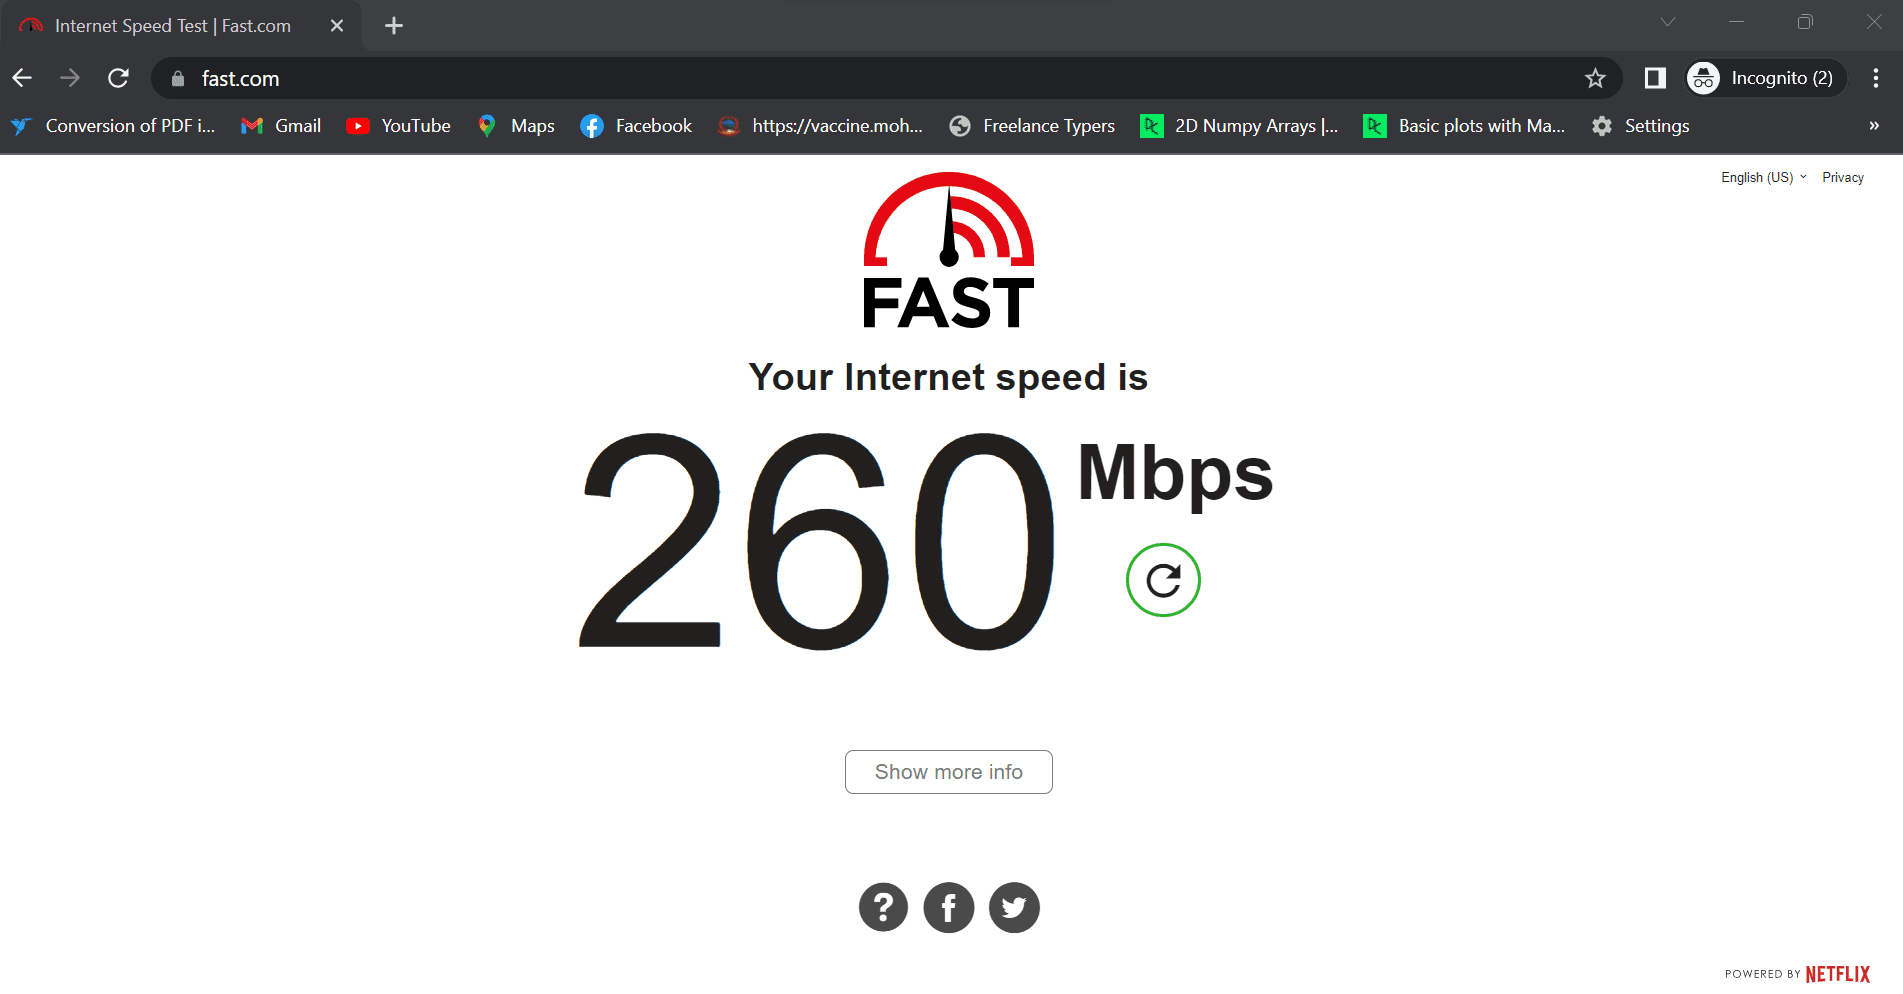 Testing internet connection in Fast.com